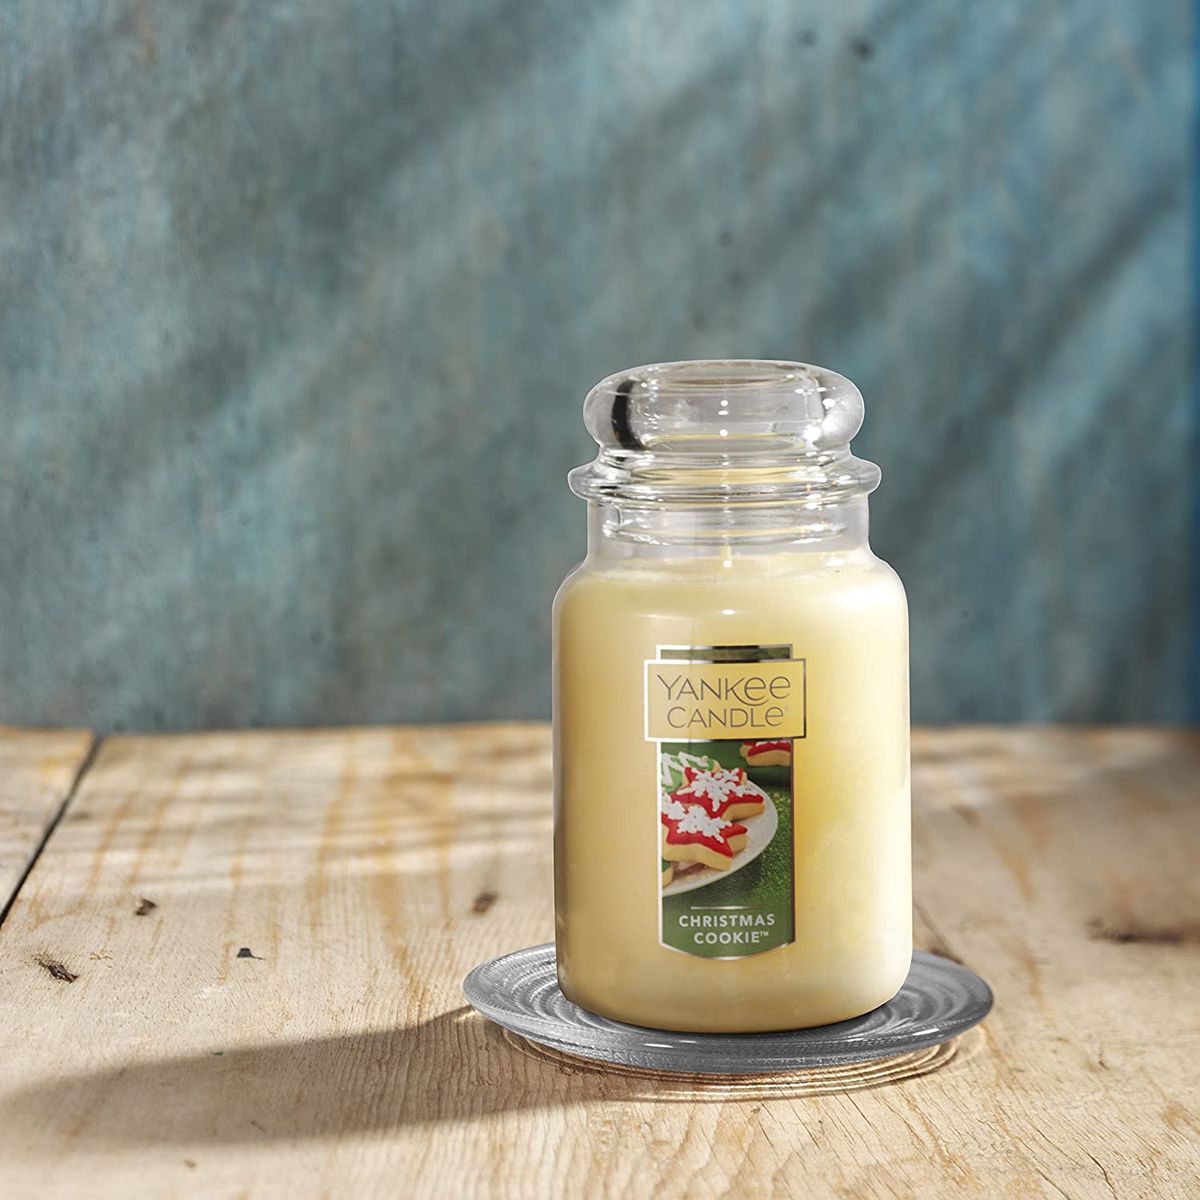 Yankee Candle's Christmas Cookie Scent Is On Sale On